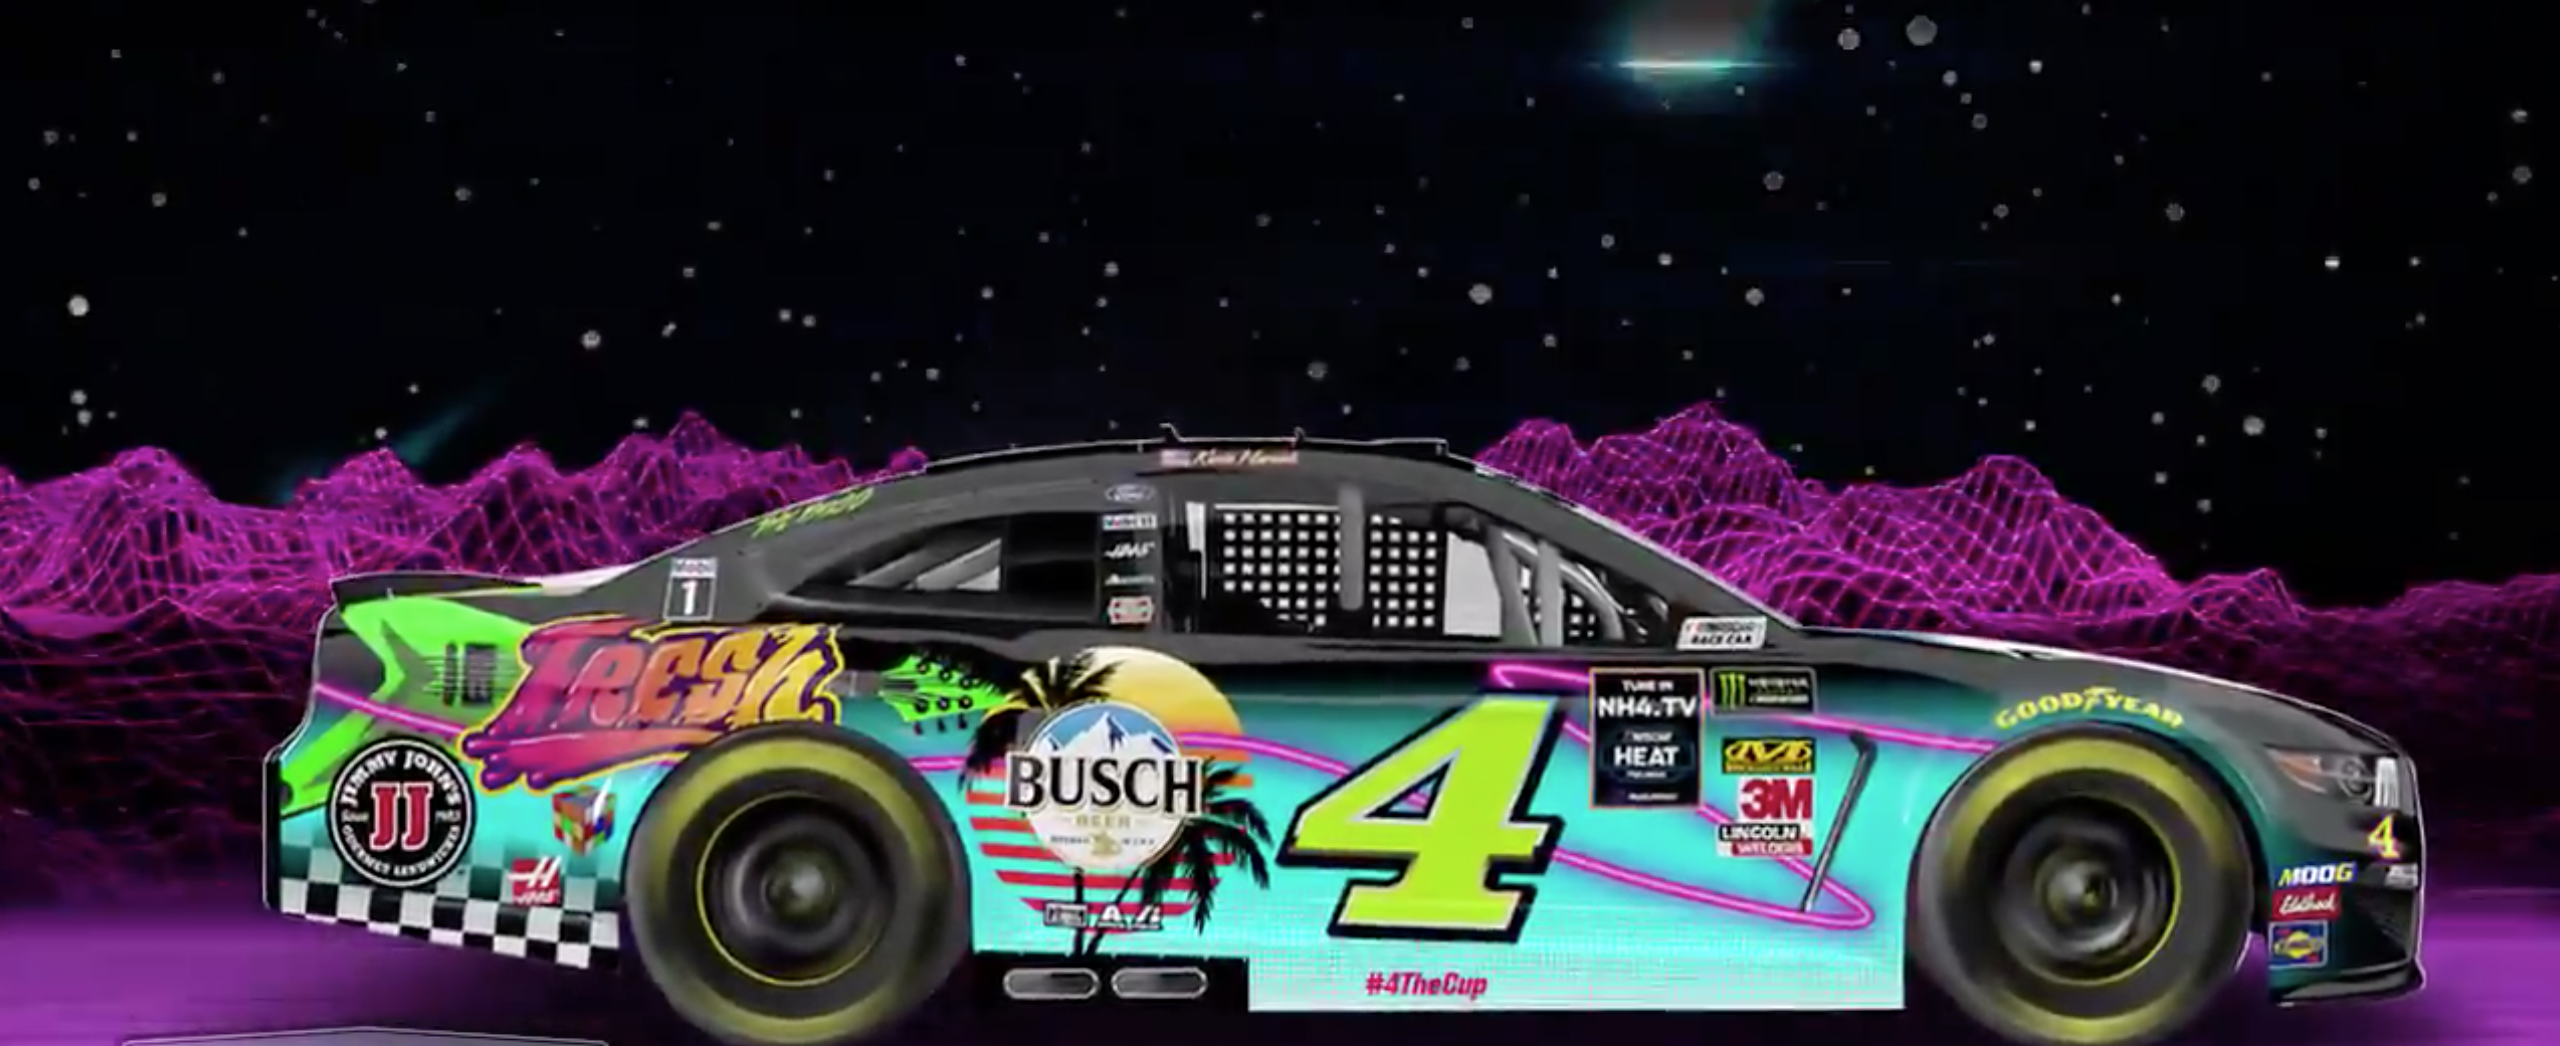 Kevin Harvick 'Gen X' Scheme Following In Footsteps Of All Star